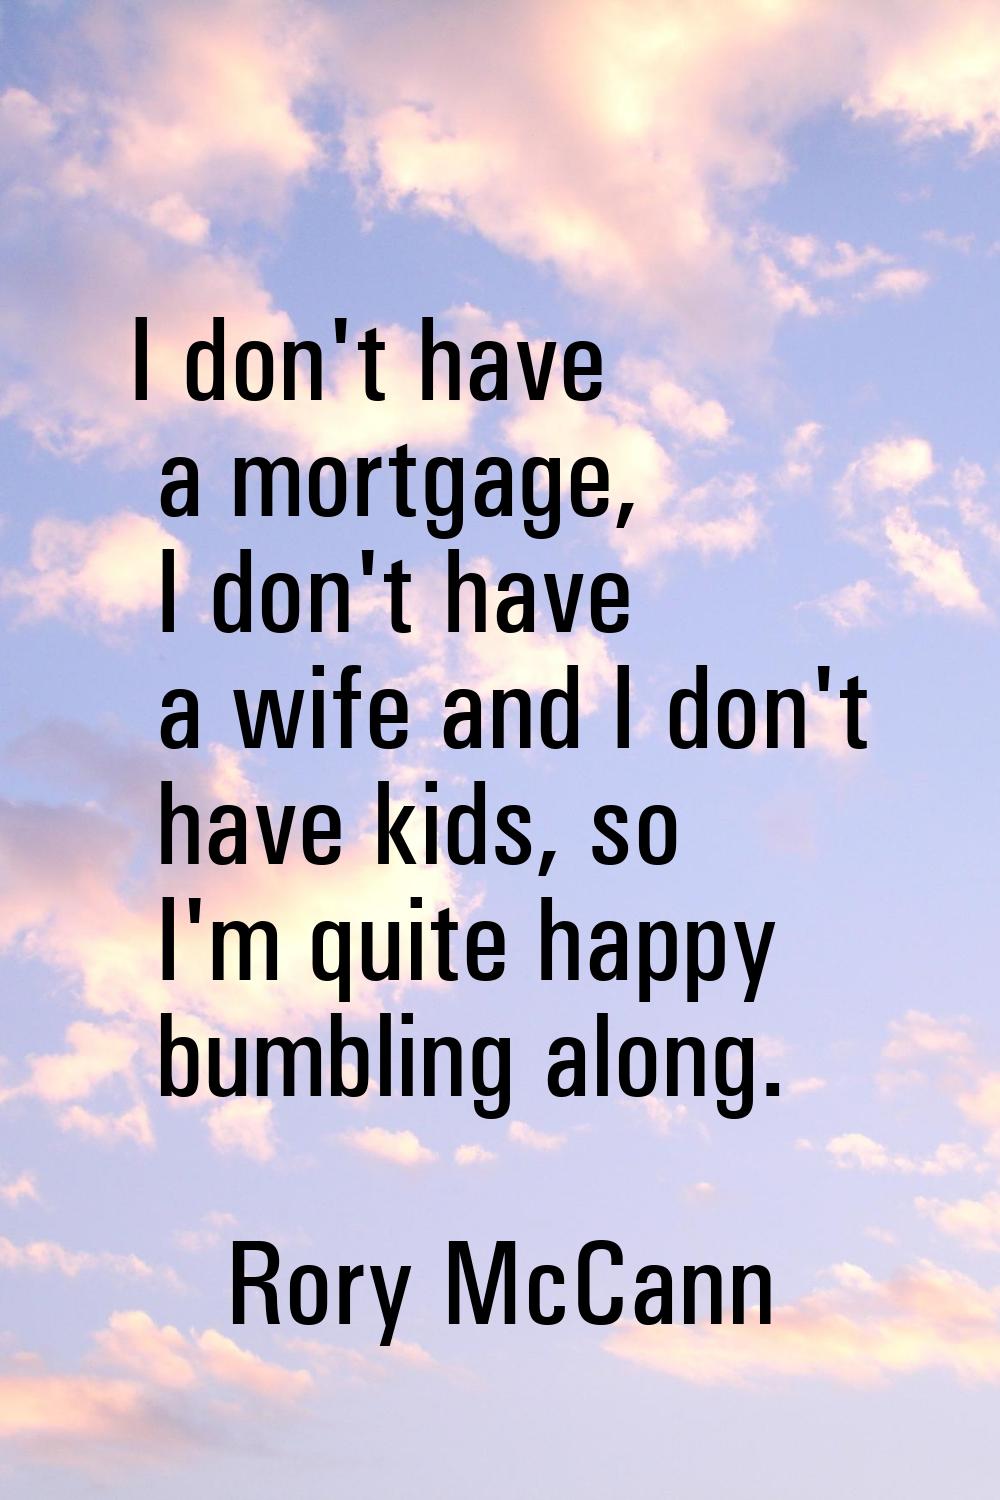 I don't have a mortgage, I don't have a wife and I don't have kids, so I'm quite happy bumbling alo